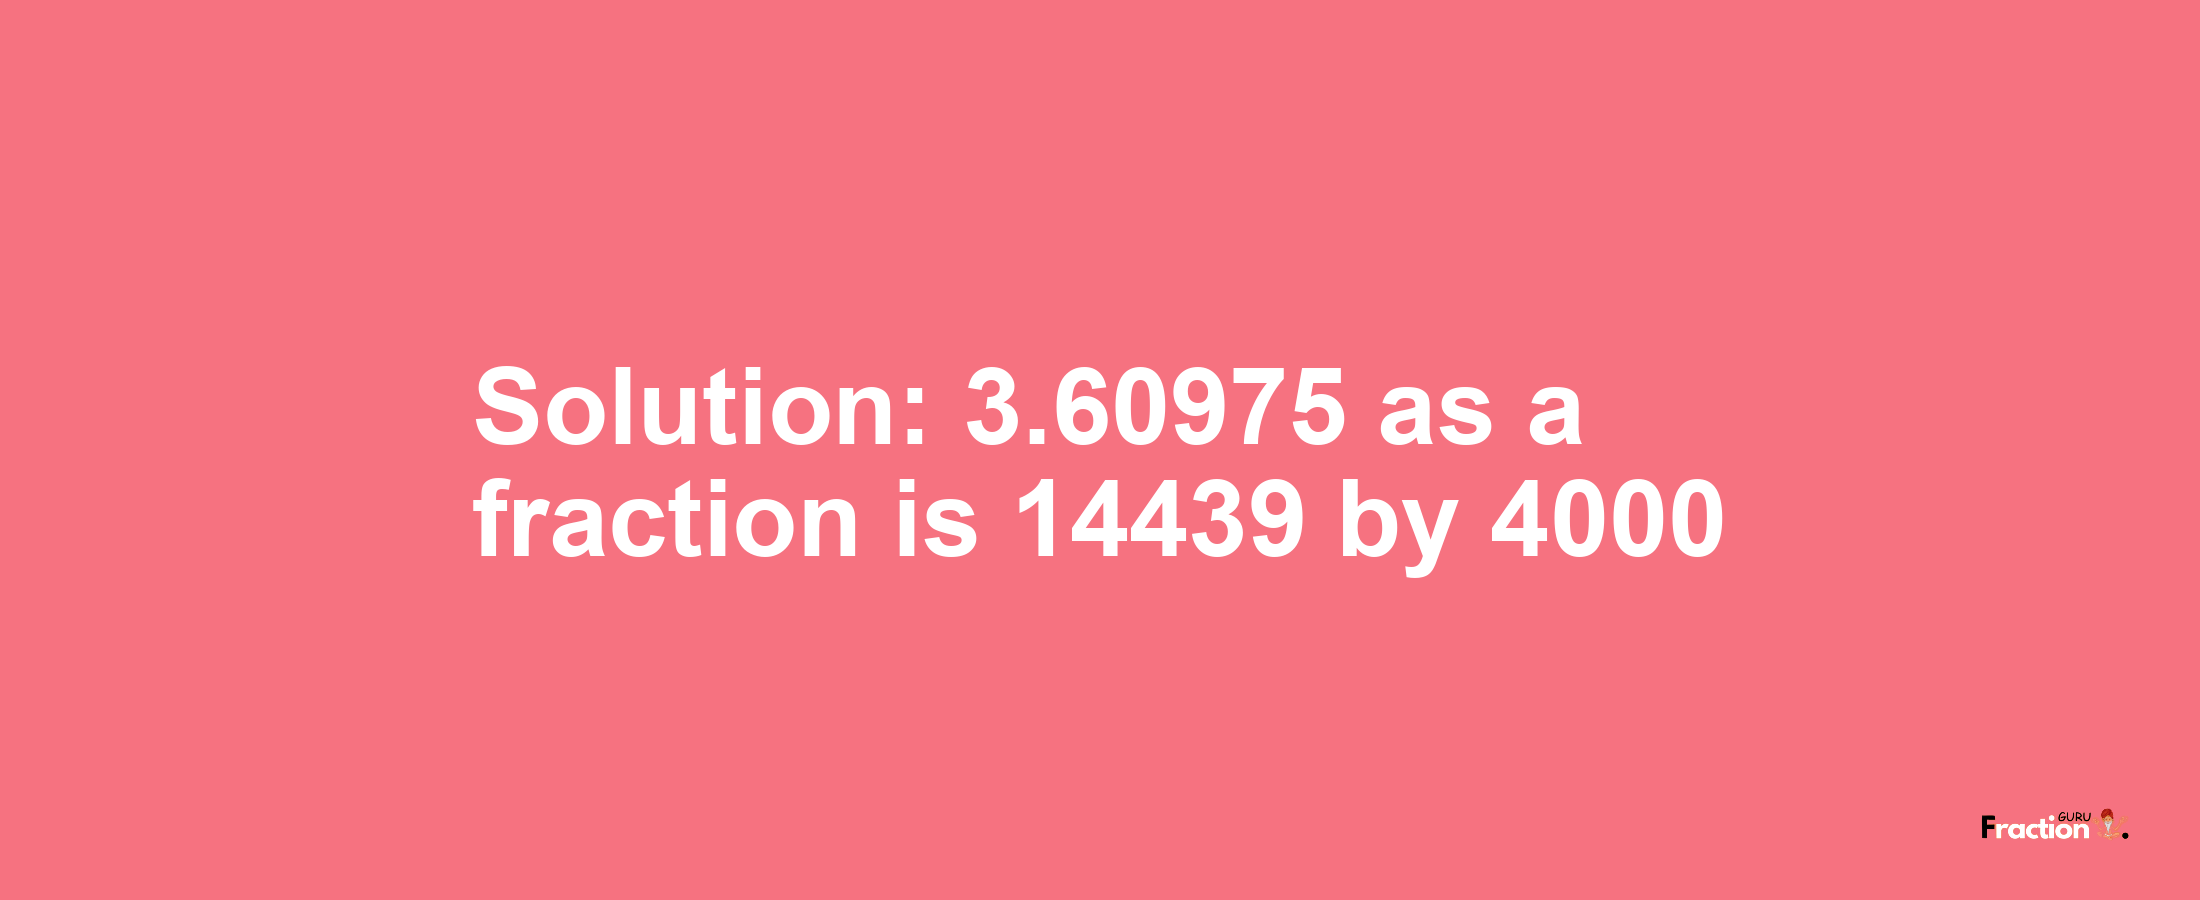 Solution:3.60975 as a fraction is 14439/4000